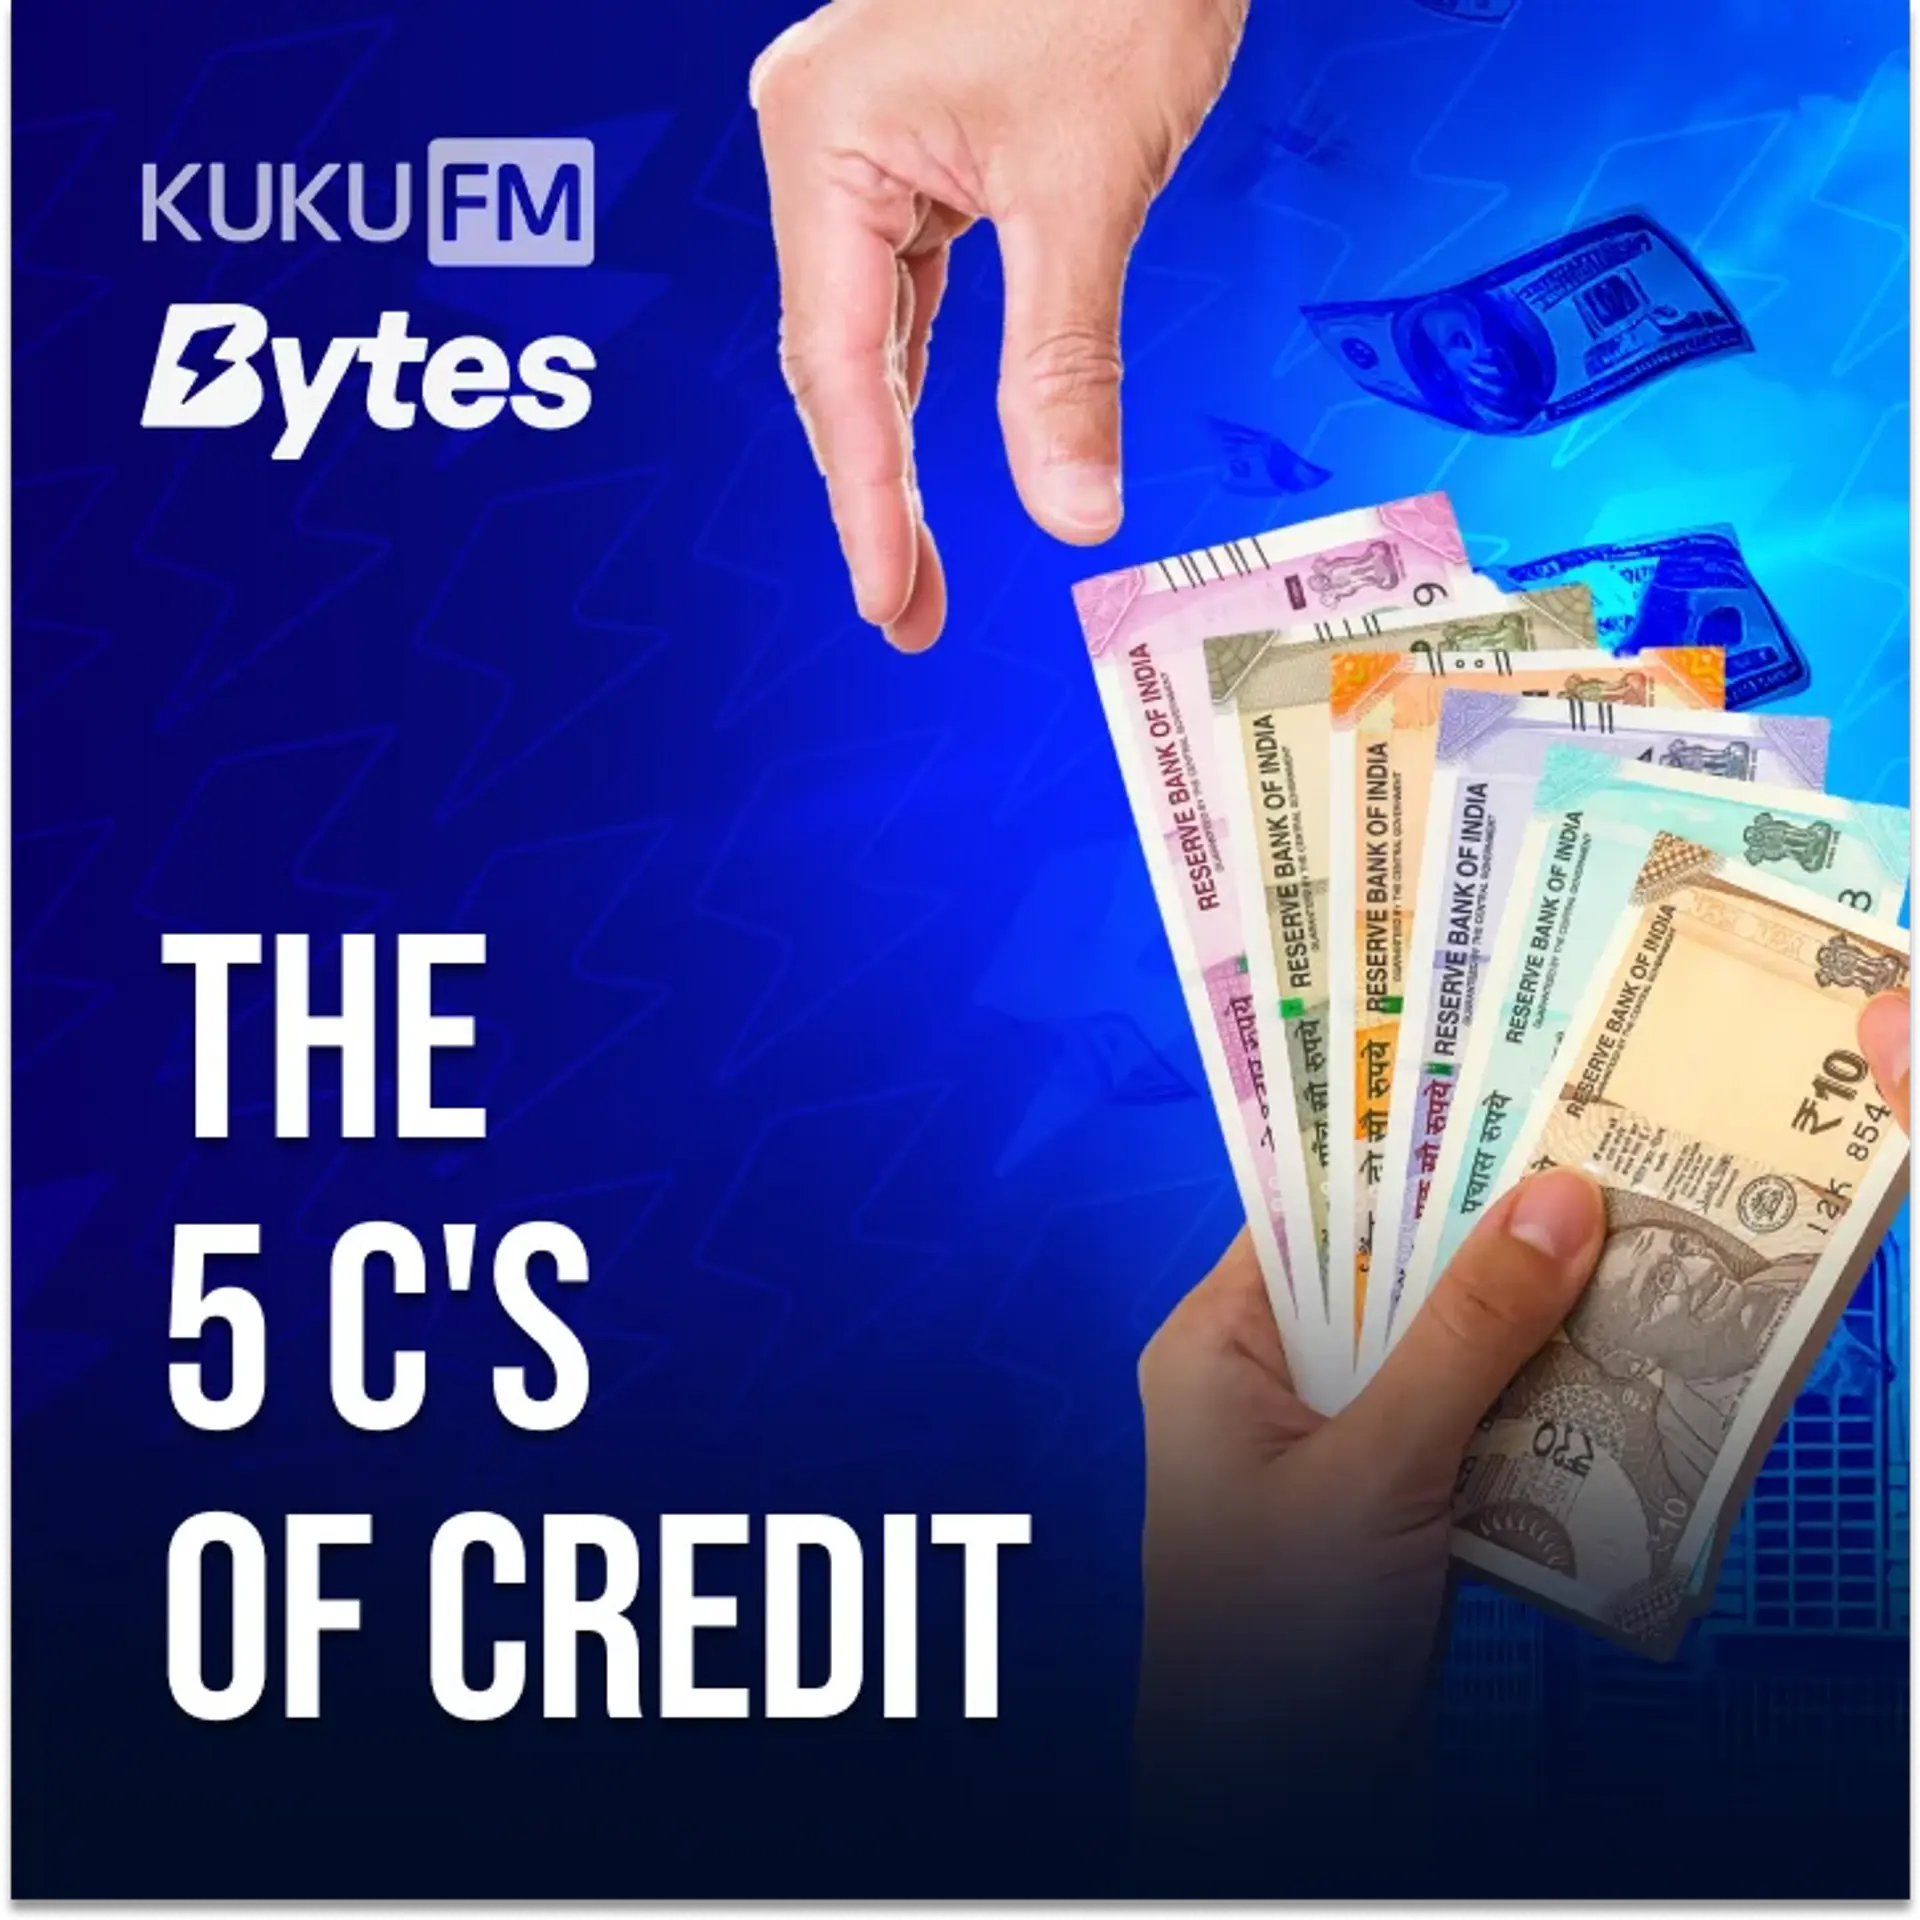 1. What are the 5 C's of Credit | 